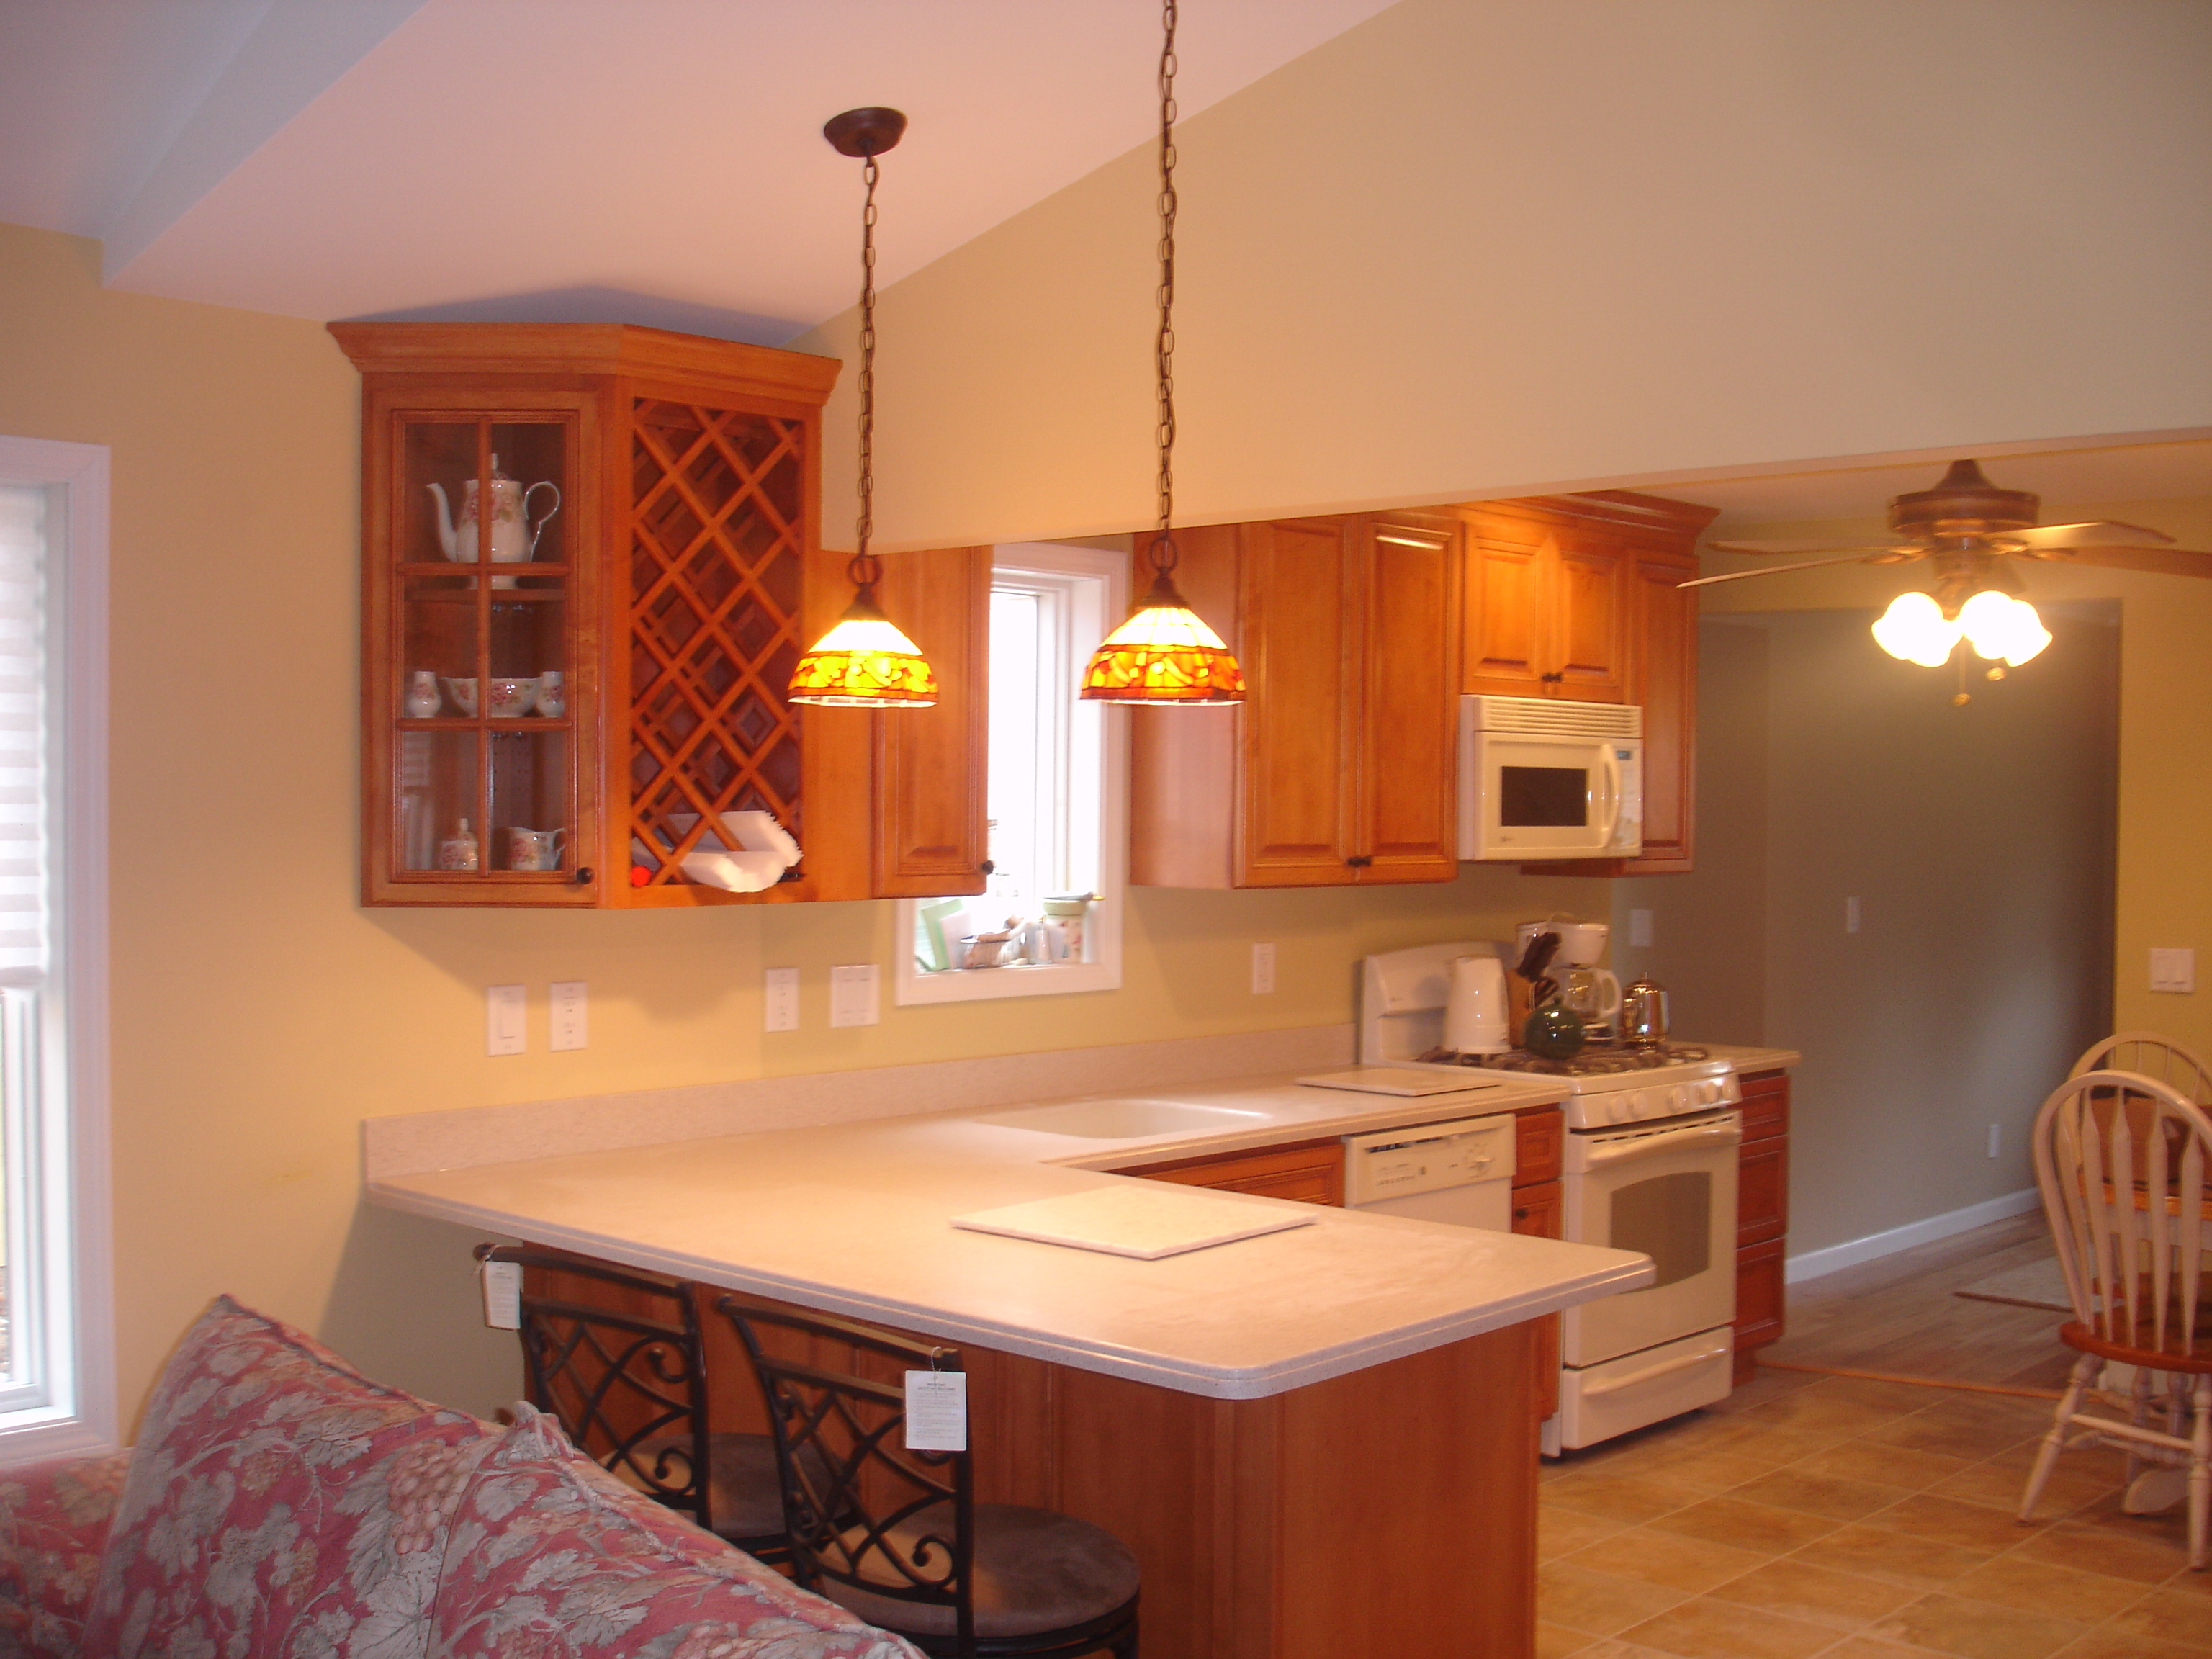 Another Happy Kitchen Customer-May 17 2008